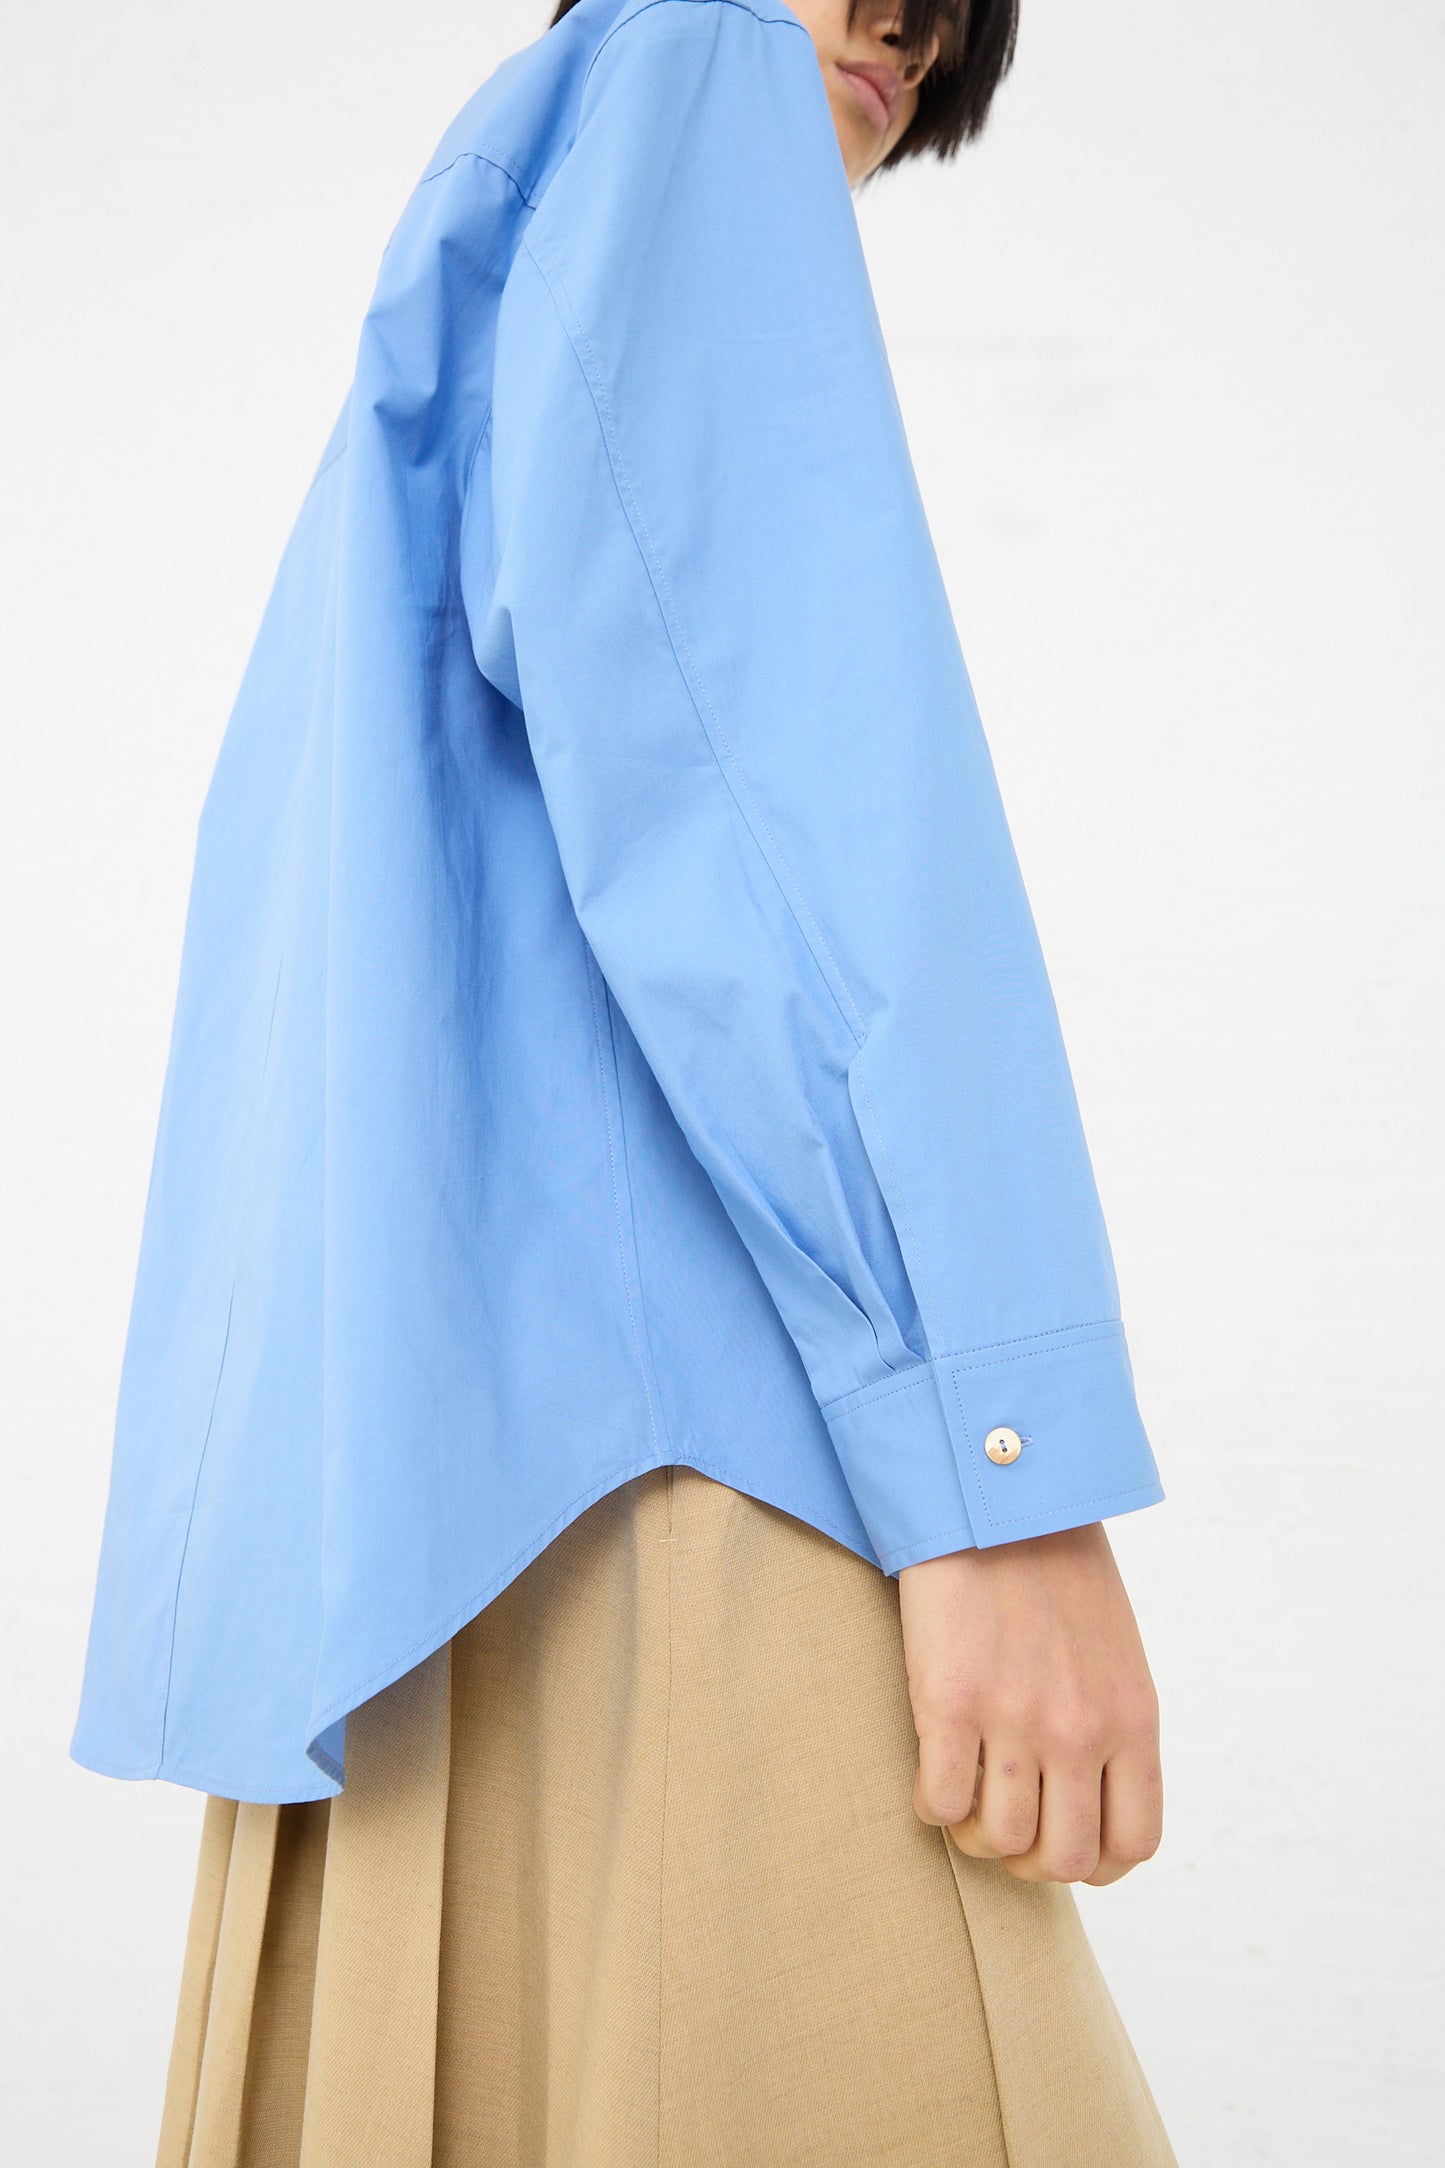 The model is wearing an oversized, long sleeve Caprice Shirt in Blue made of organic cotton by Rejina Pyo. Side view.